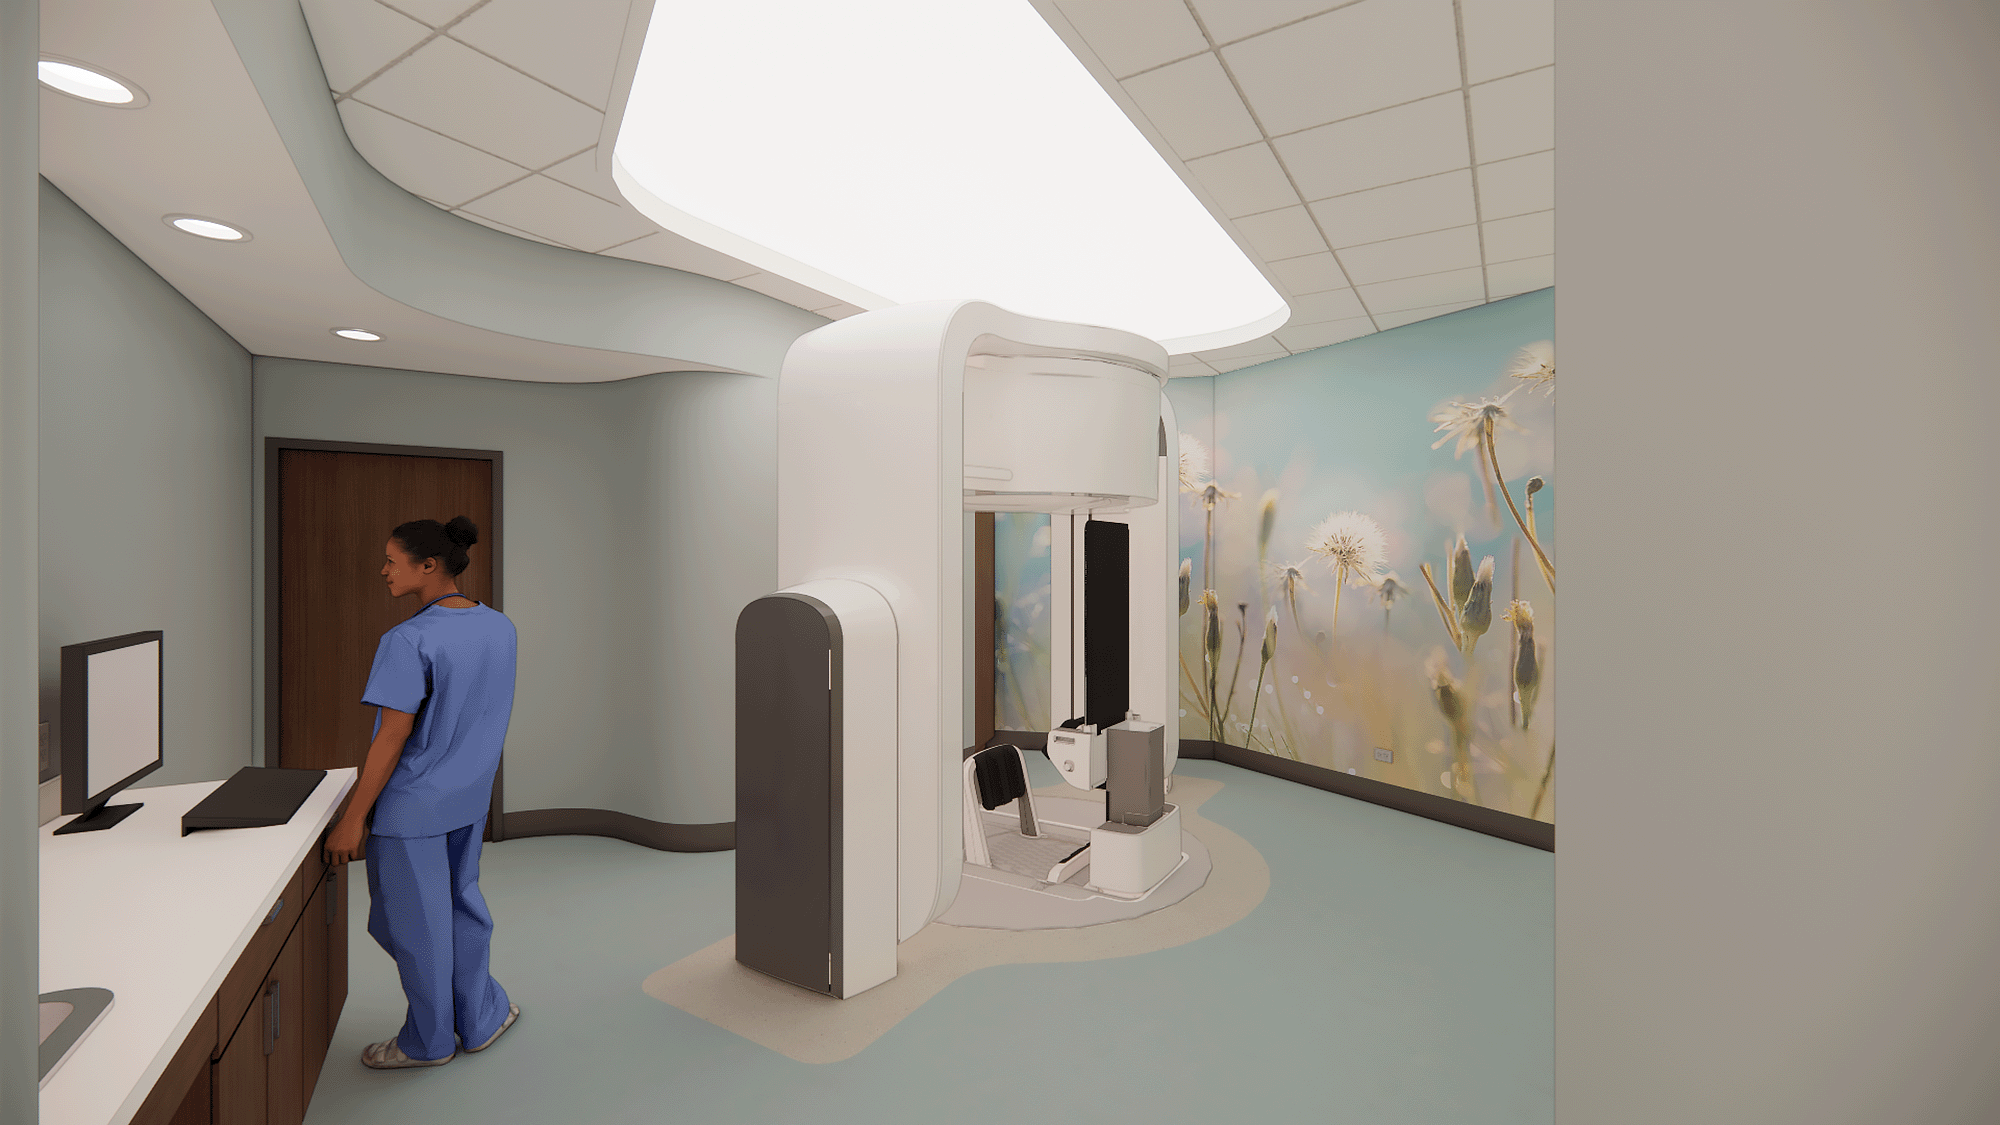 Concept rendering of a proton therapy vault